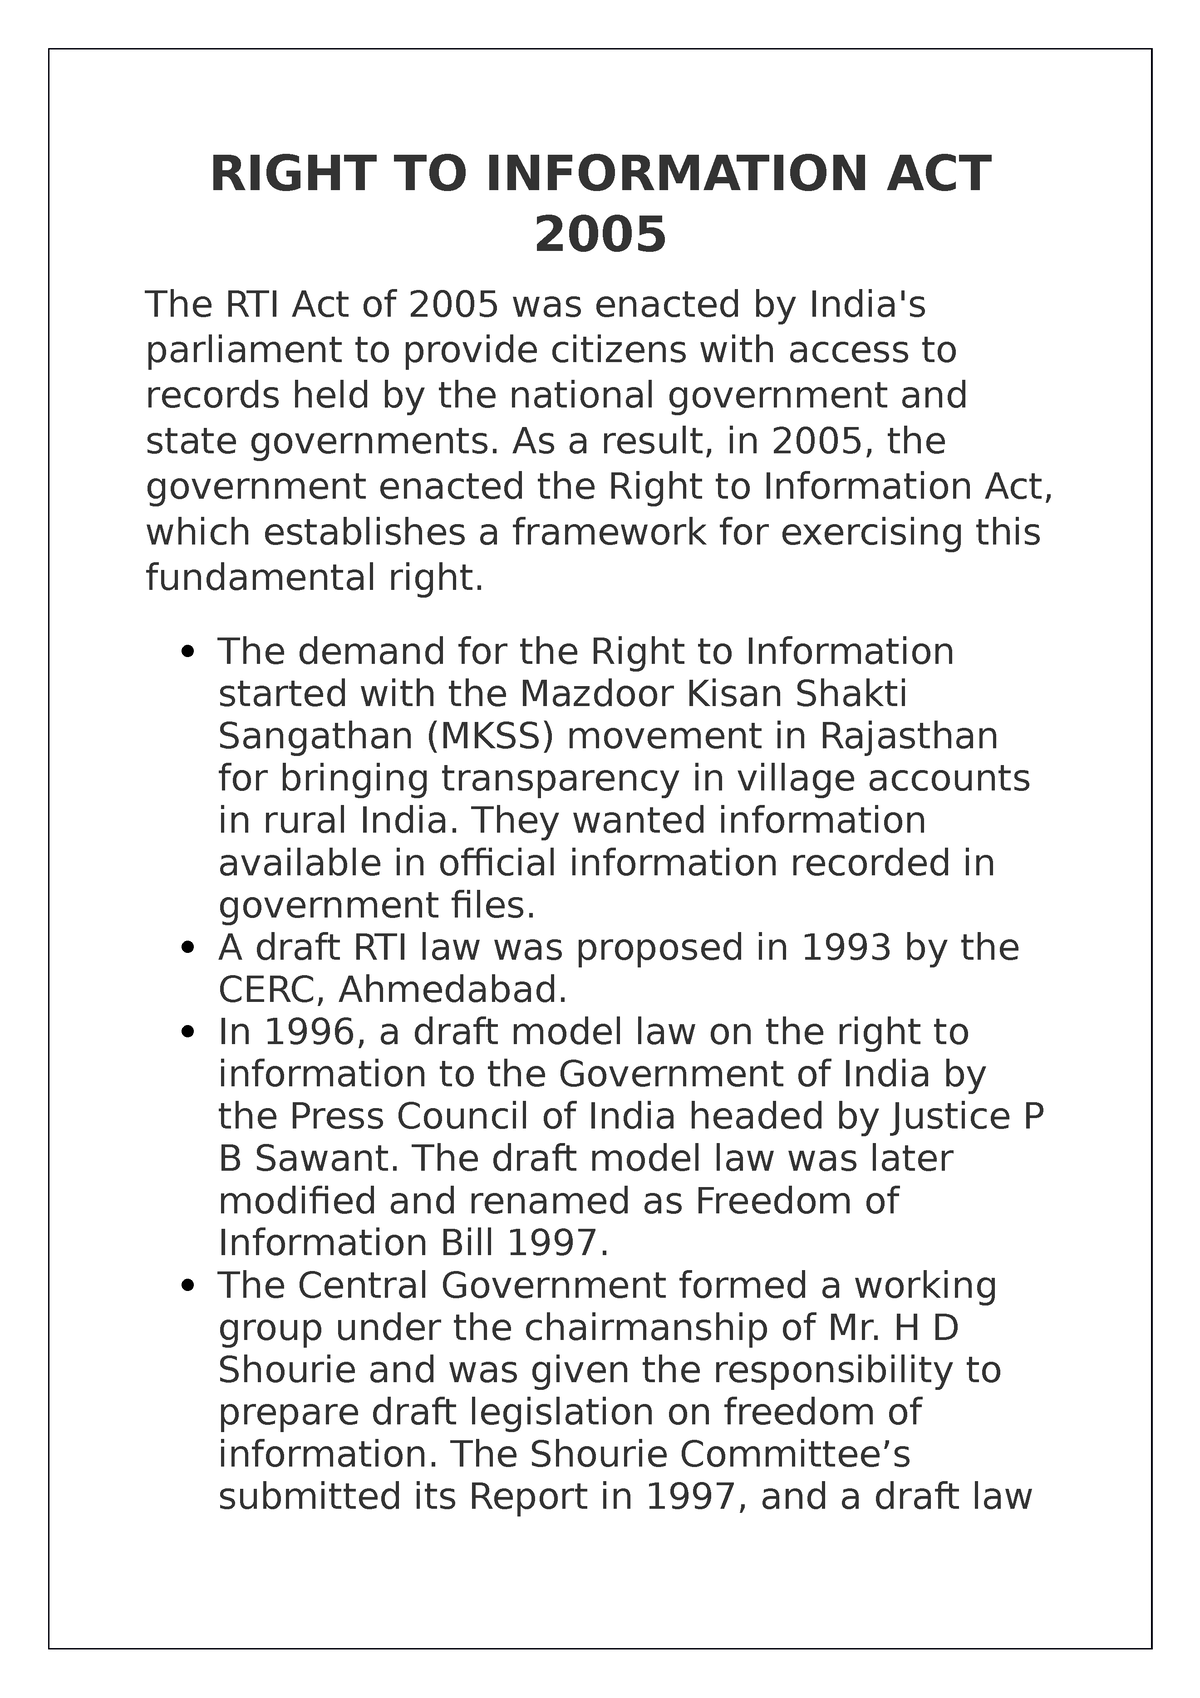 research paper on right to information act 2005